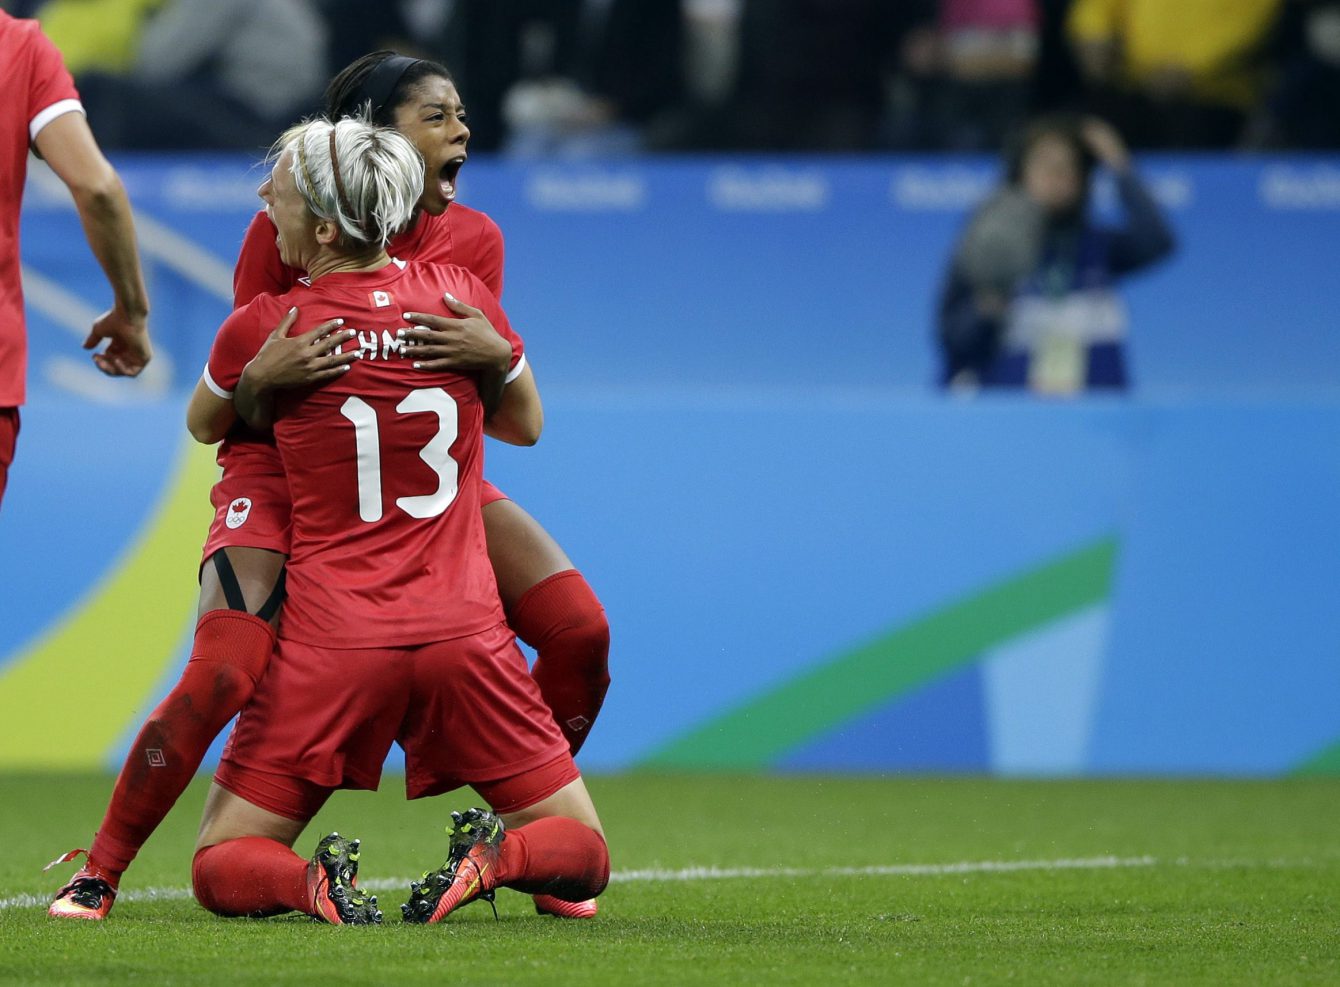 Canada's Sophie Schmidt,, 13, celebrates with teammate Canada's Ashley Lawrence celebrates after scoring her team's first goal during a quarter-final match of the women's Olympic football tournament between Canada and France in Sao Paulo, Brazil, Friday Aug. 12, 2016.(AP Photo/Nelson Antoine)